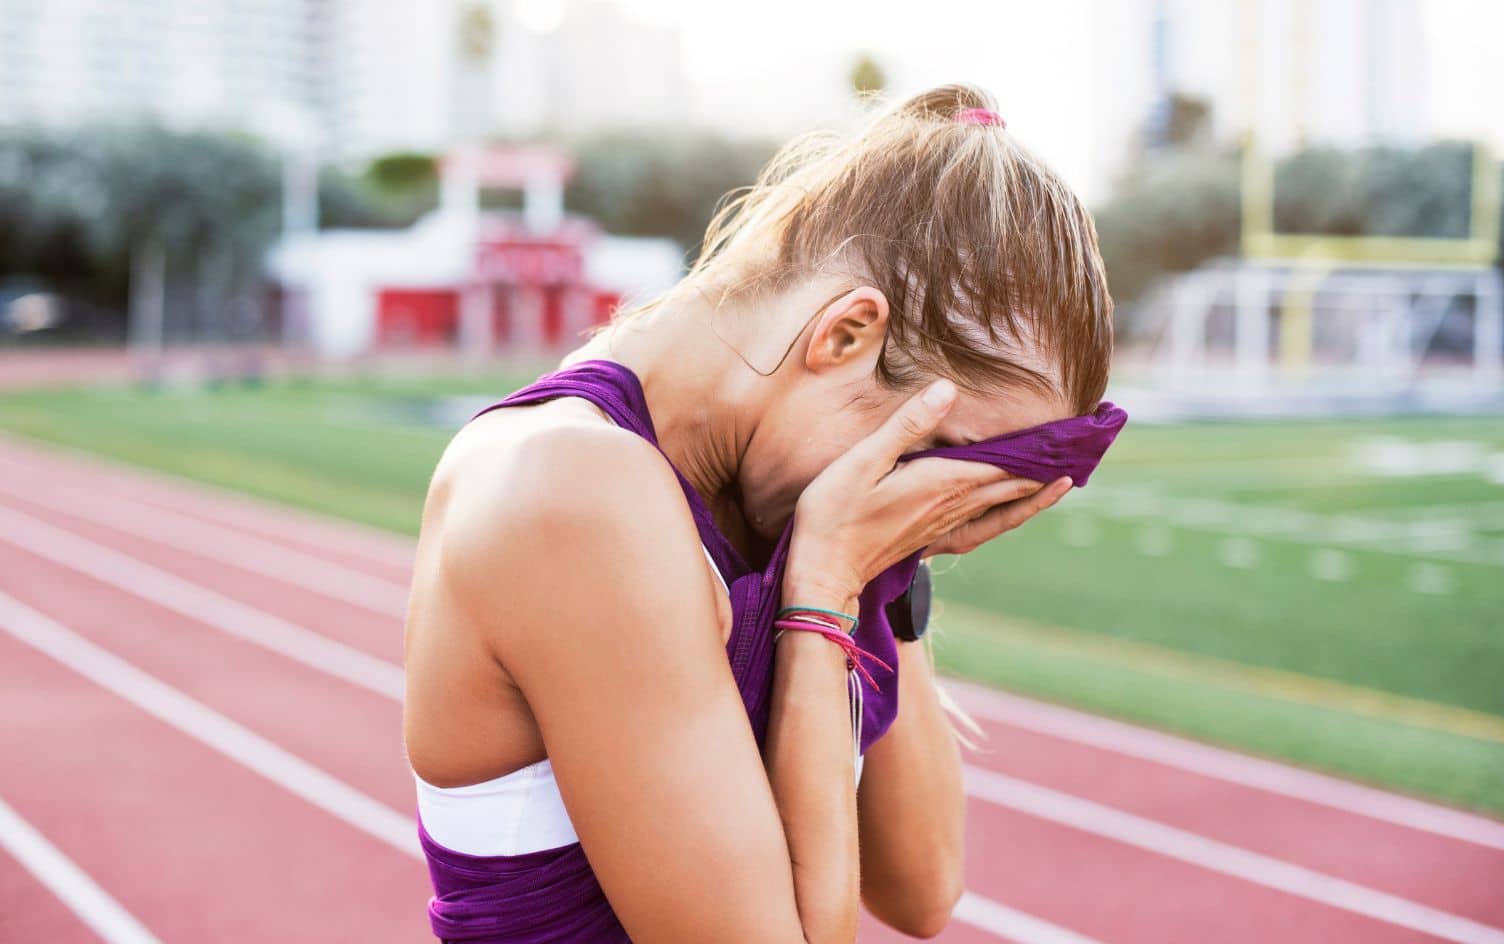 Why You May Feel Worse About Your Body After a Workout